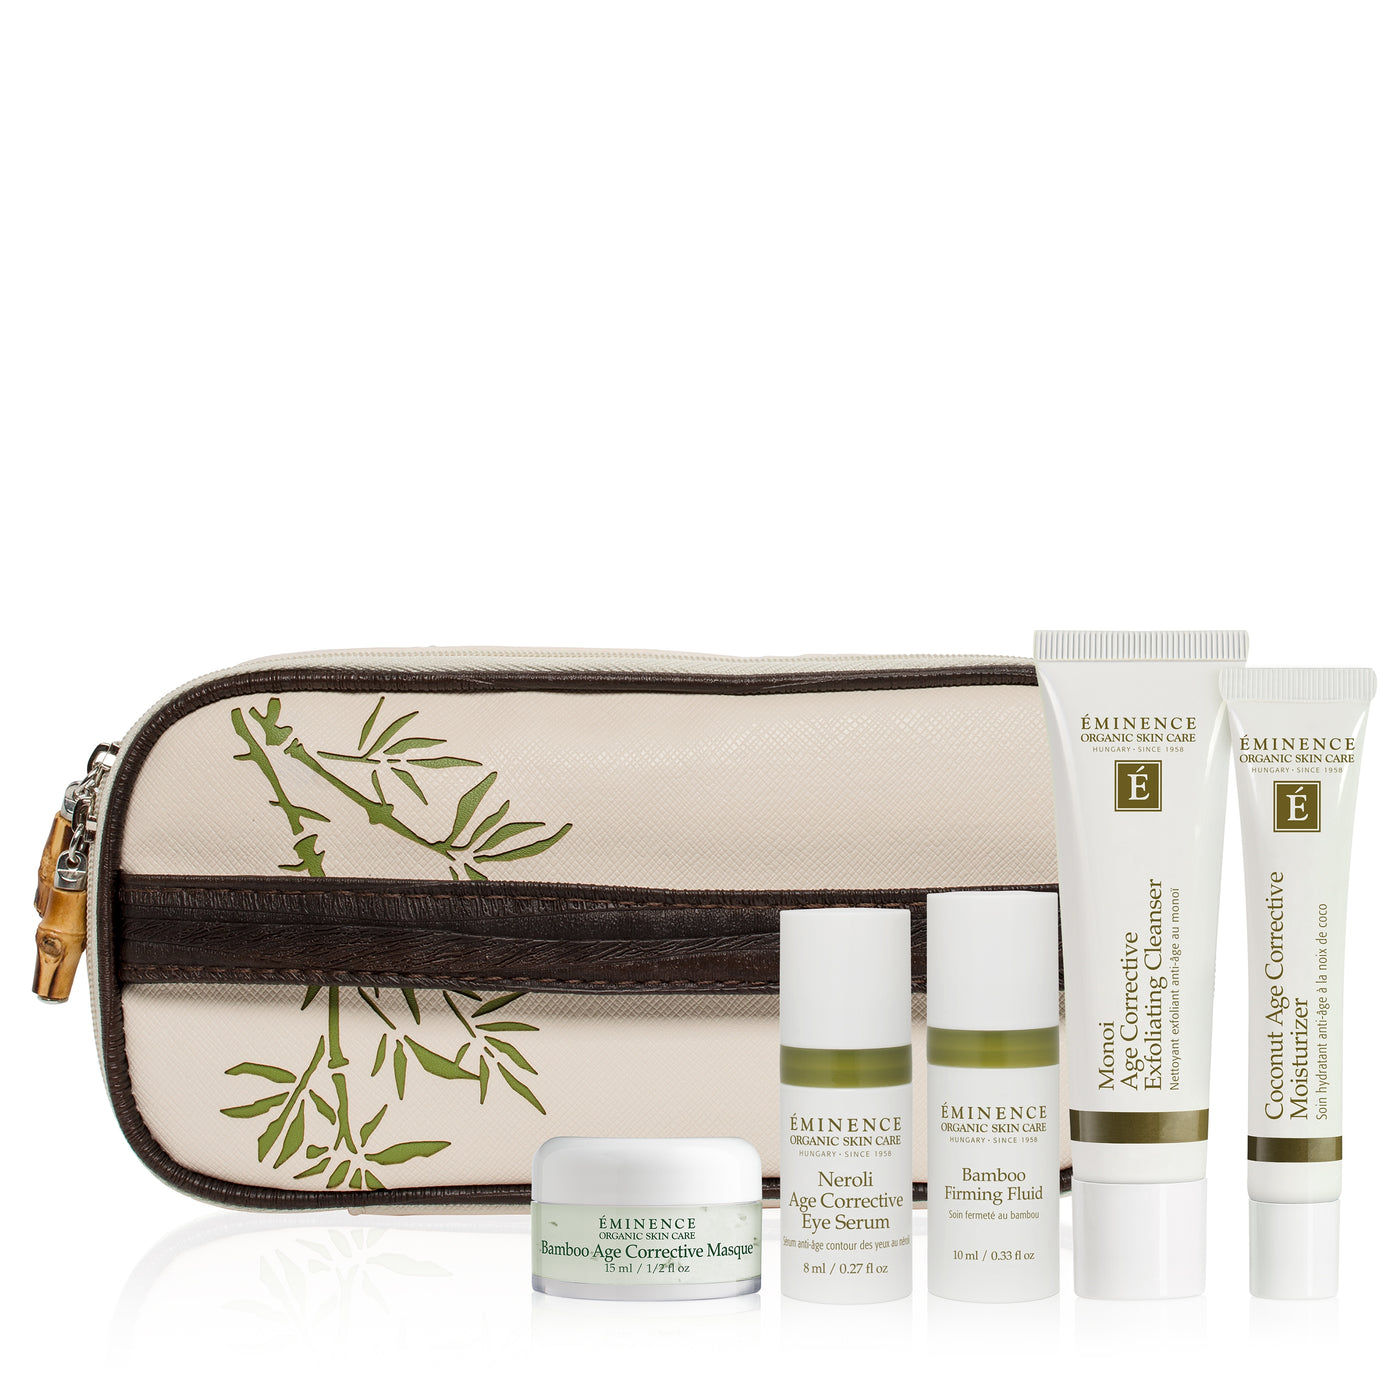 Age Corrective Starter Set - Radiance Clean Beauty